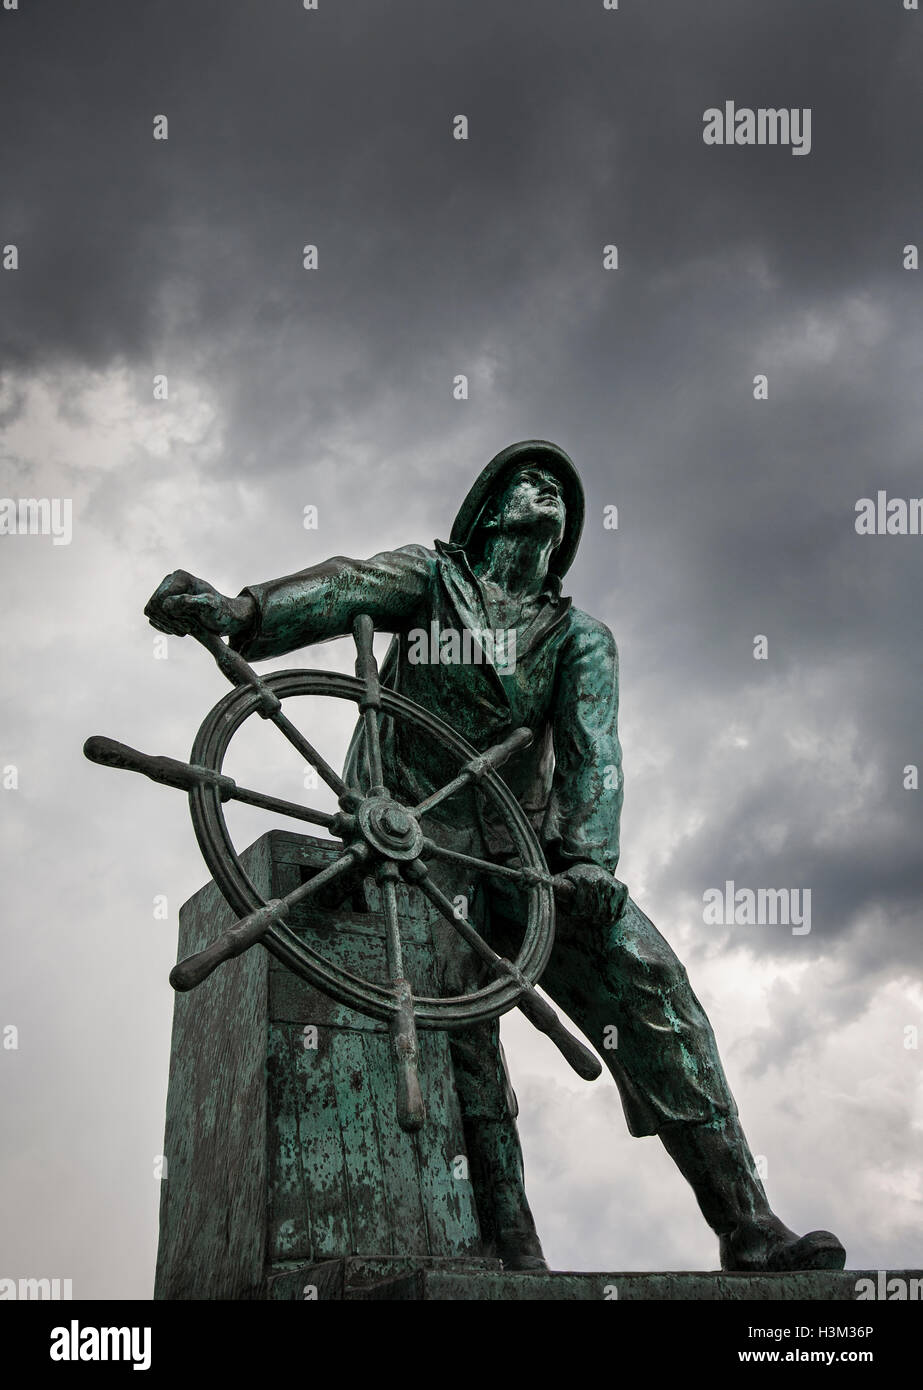 Fisherman's Memorial in Glouchester, Massachusetts, USA 'They That Go Down to the Sea in Ships'. New England, ship in storm seaside objects Stock Photo